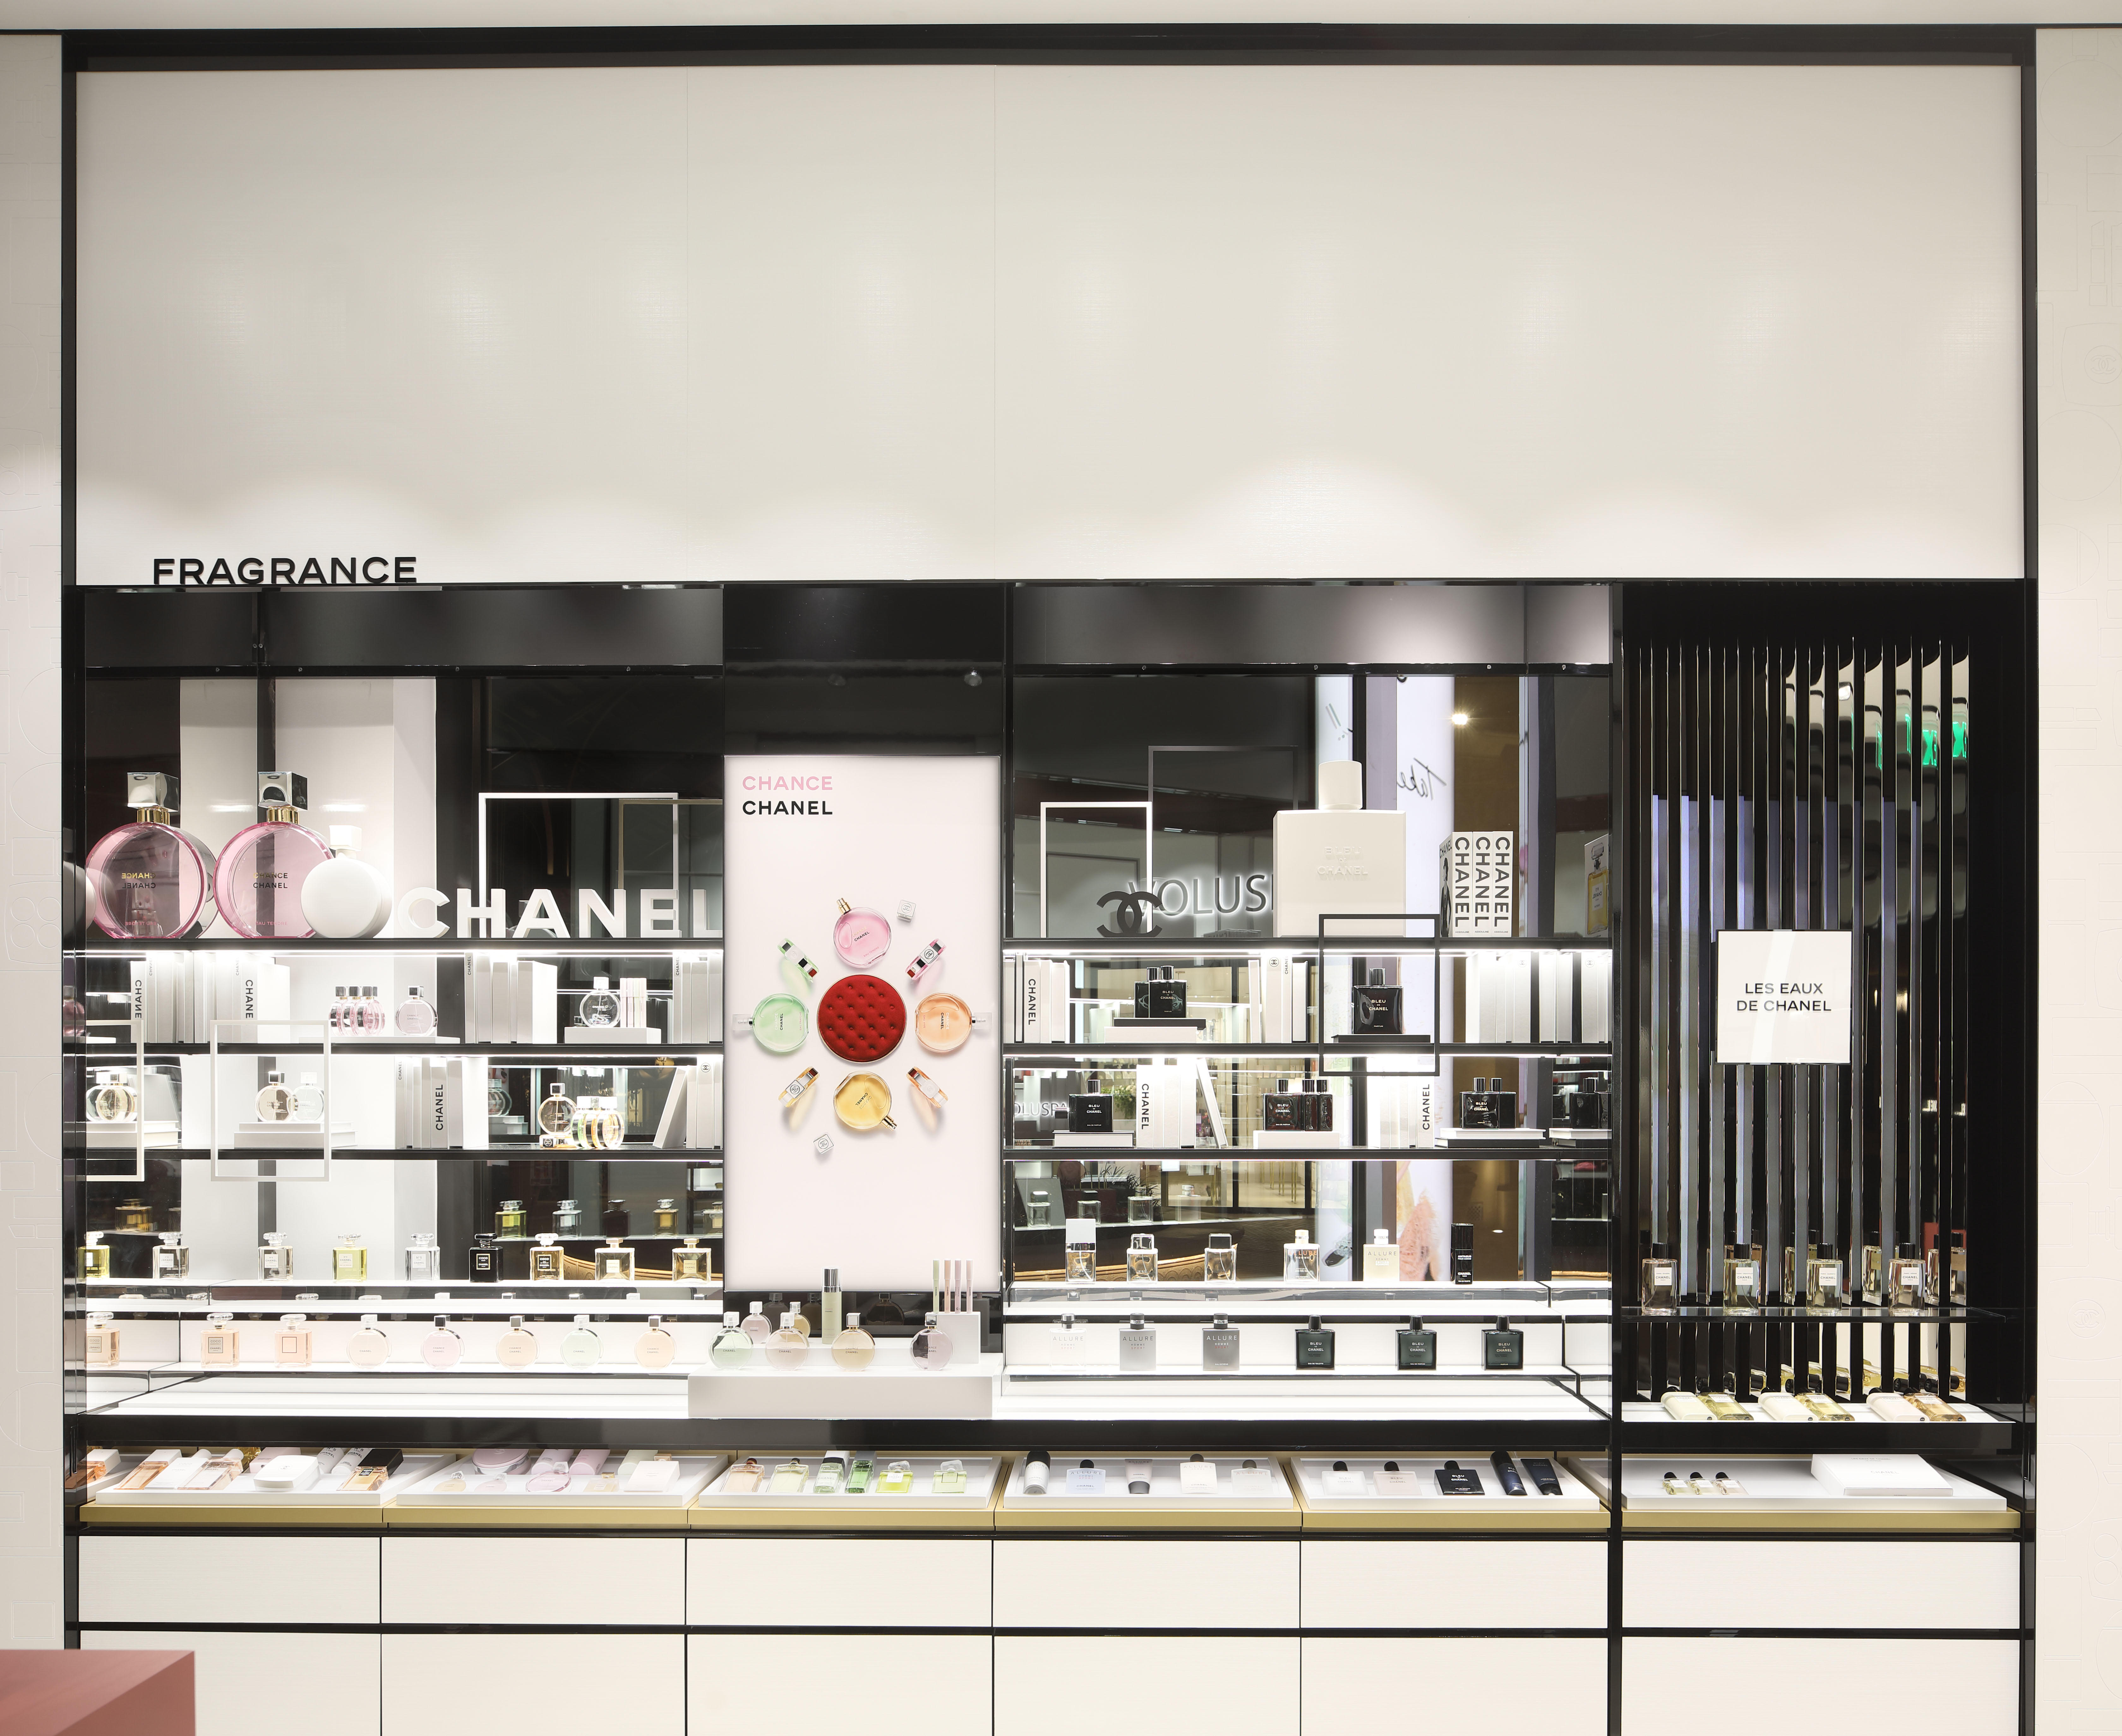 Chanel Fragrance and Beauty Boutique opens in Plano